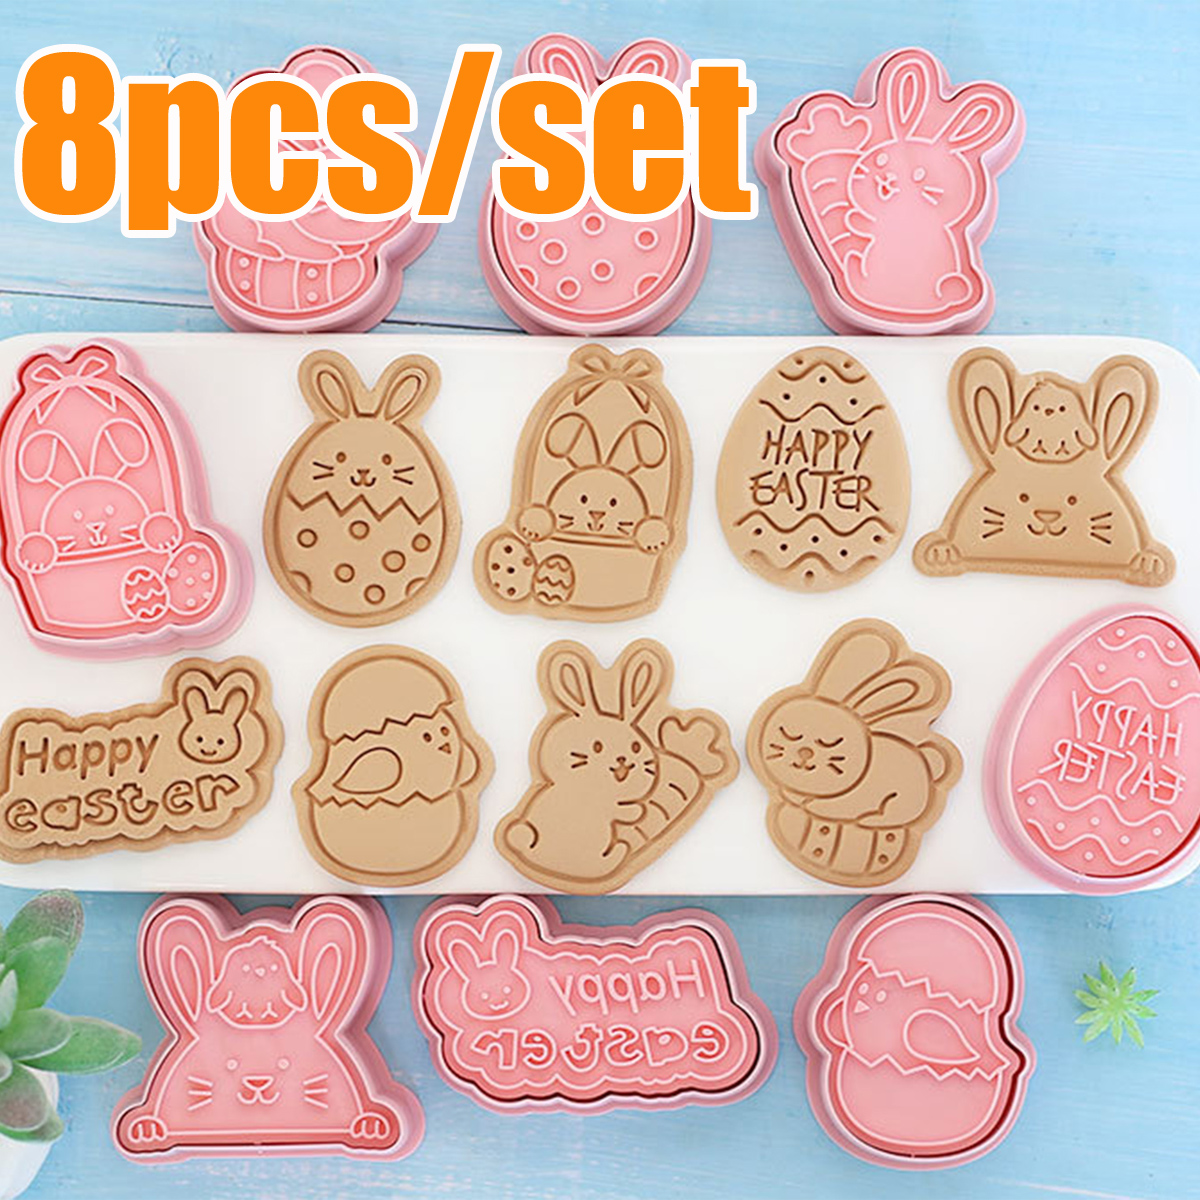 Travelwant 8pcs/set Easter Cookie Cutters 3D Embossing Cookie Stamper Plastic Biscuit Molds Rabbit Bunny Egg Butterfly Basket Stamps for DIY Cake